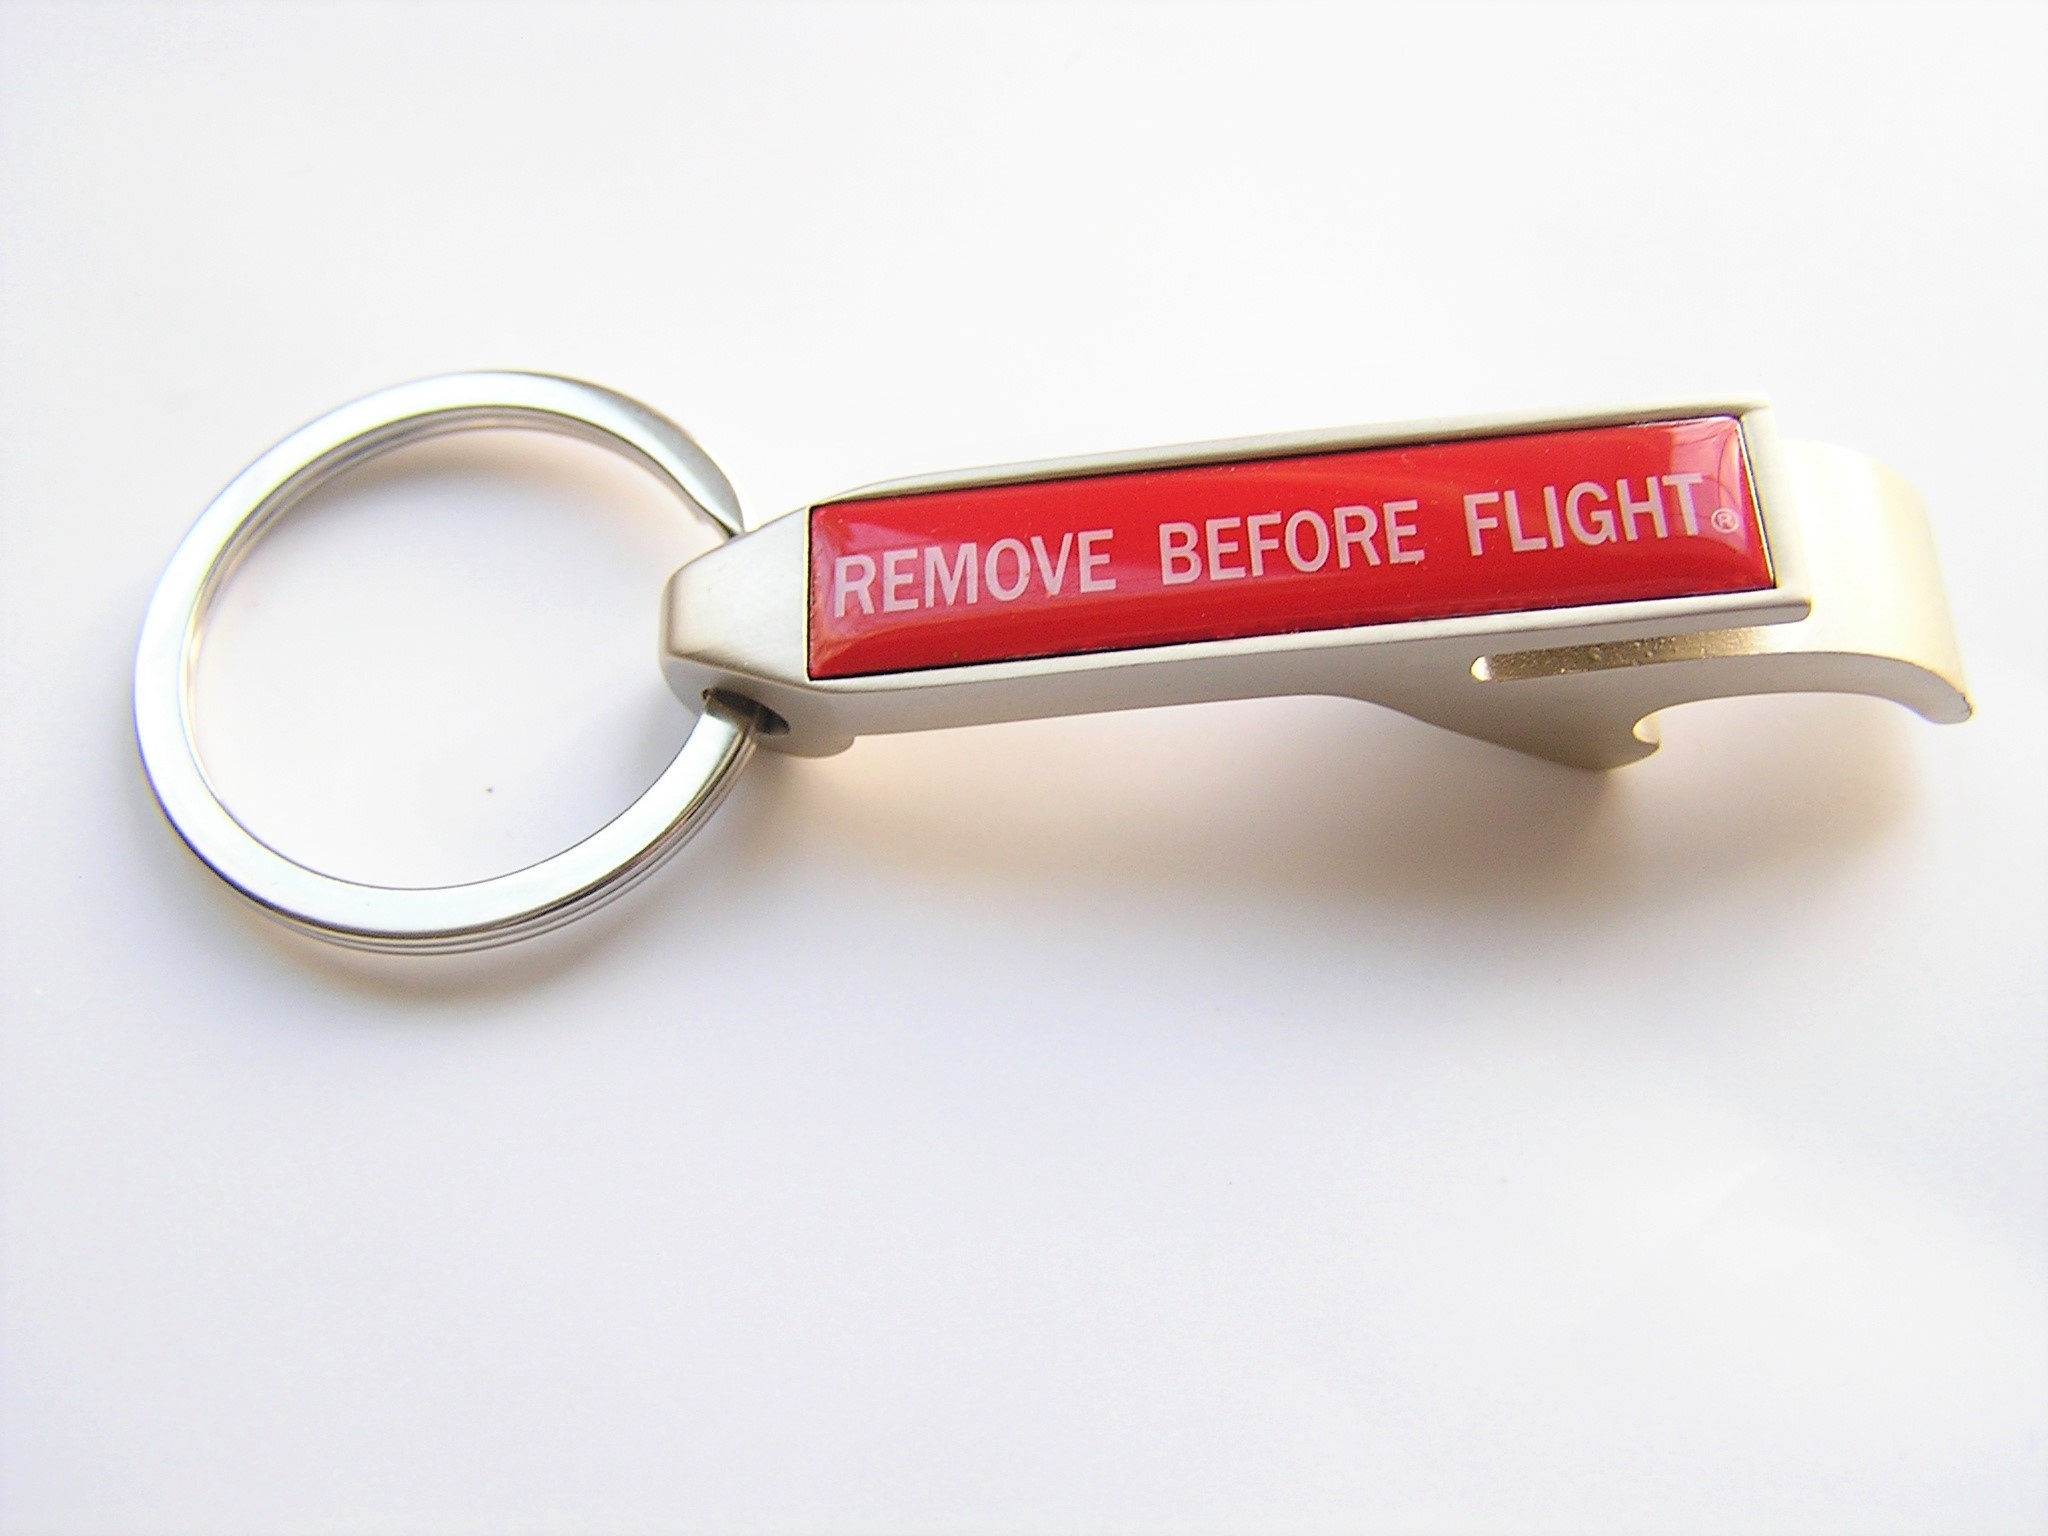 Aircraft Model Store 'Remove Before Flight' Keychain - Aircraft Model Store